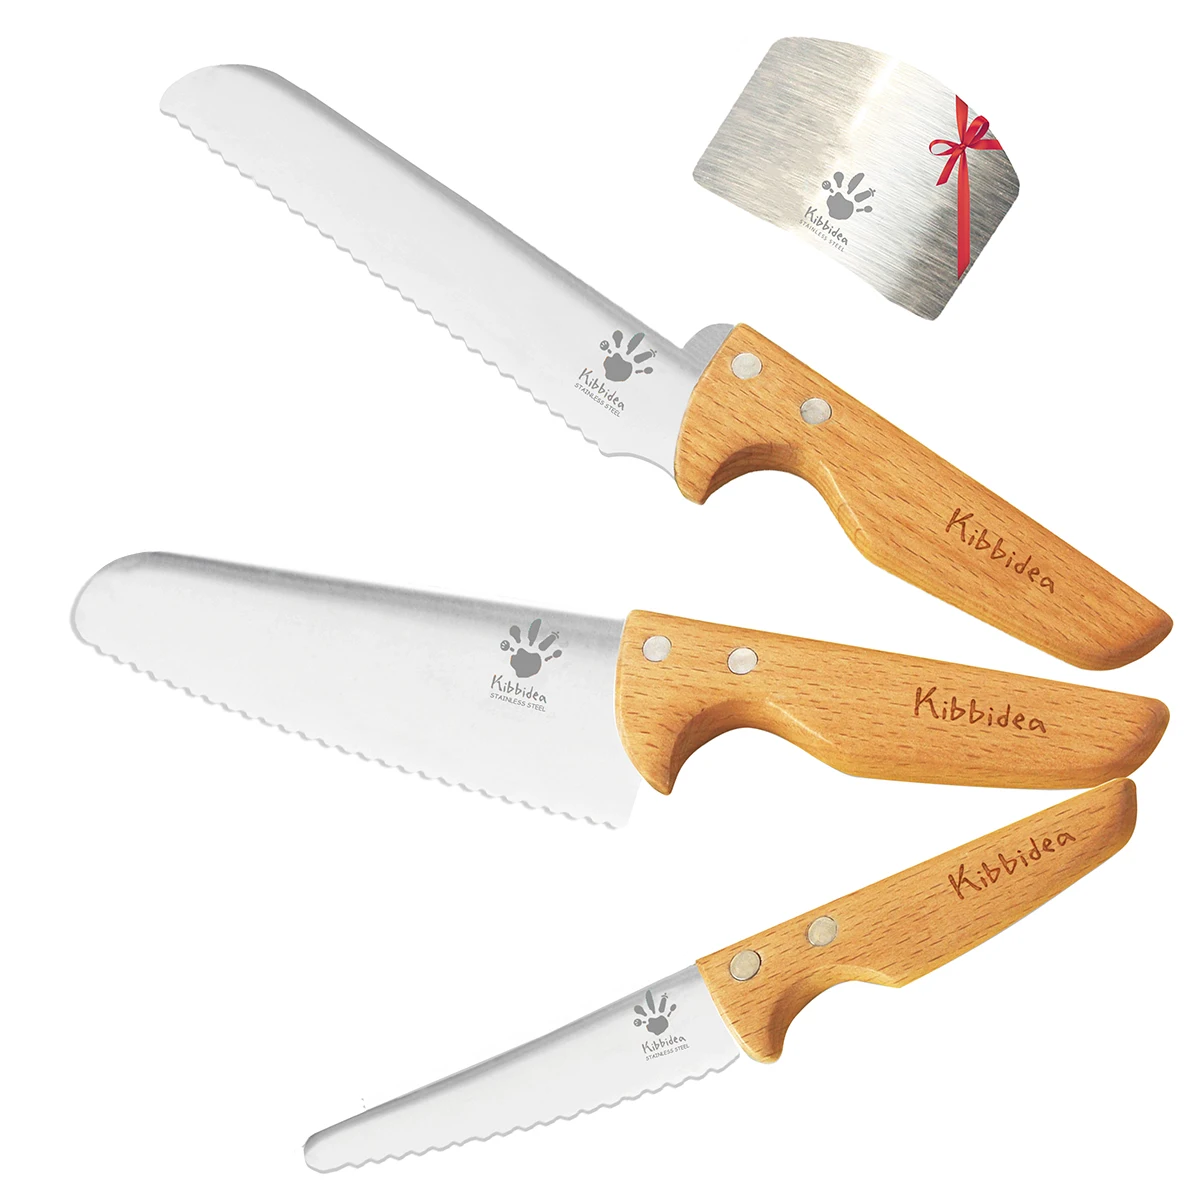 3 pk. Copper Paring Kitchen Knife Set - As Seen On TV